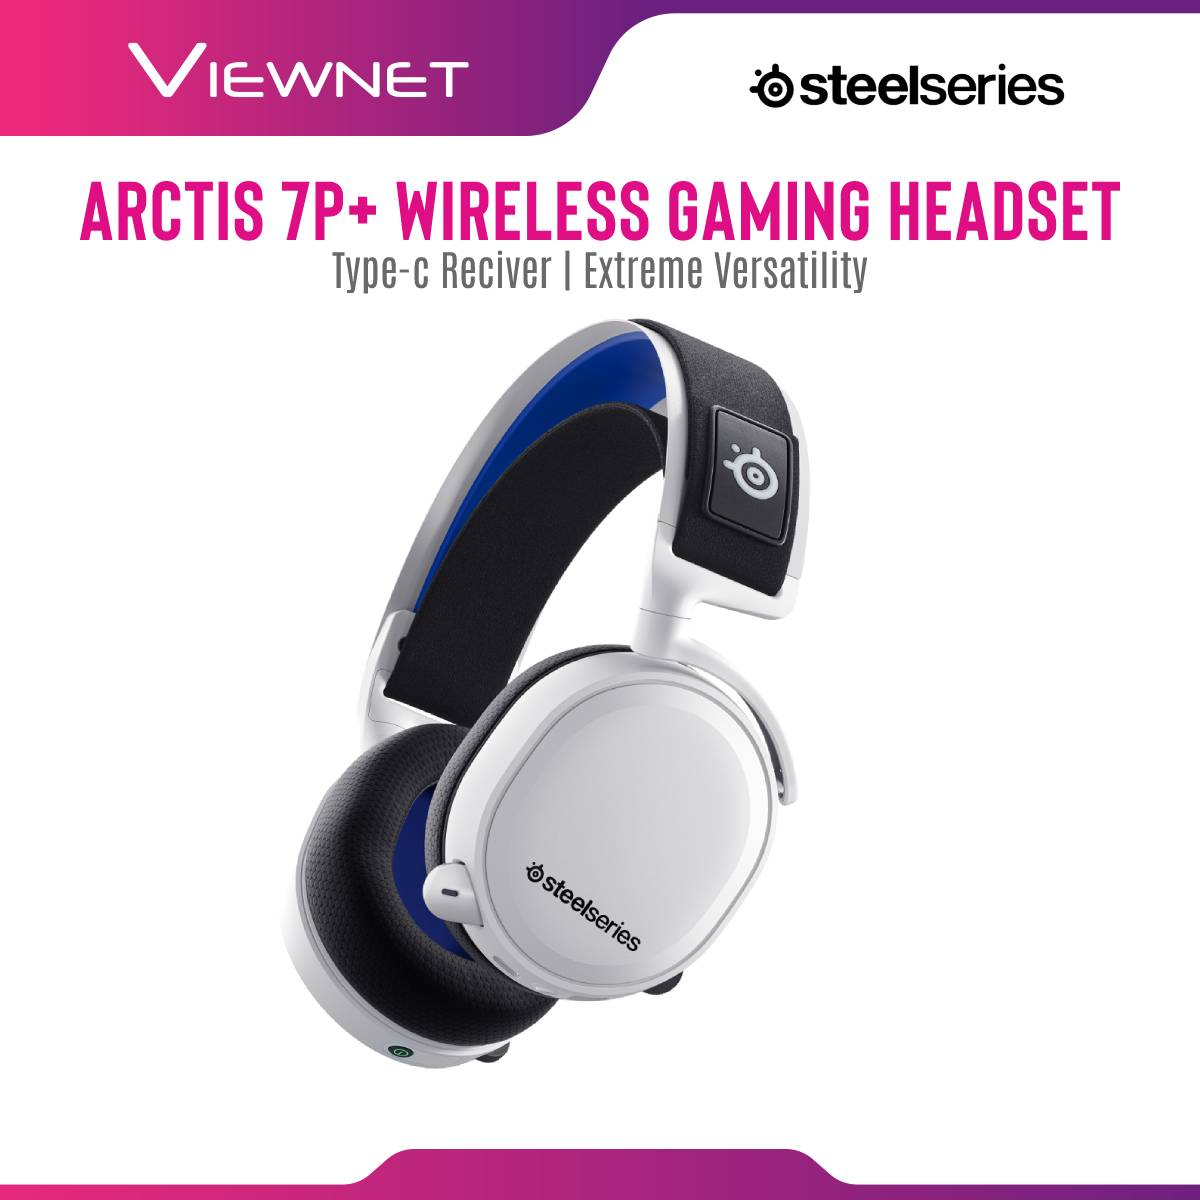 Steelseries Arctis 7+ Wired / Wireless Gaming Headset / Steelsereis Arctis 7P+ Wireless Gaming Headset